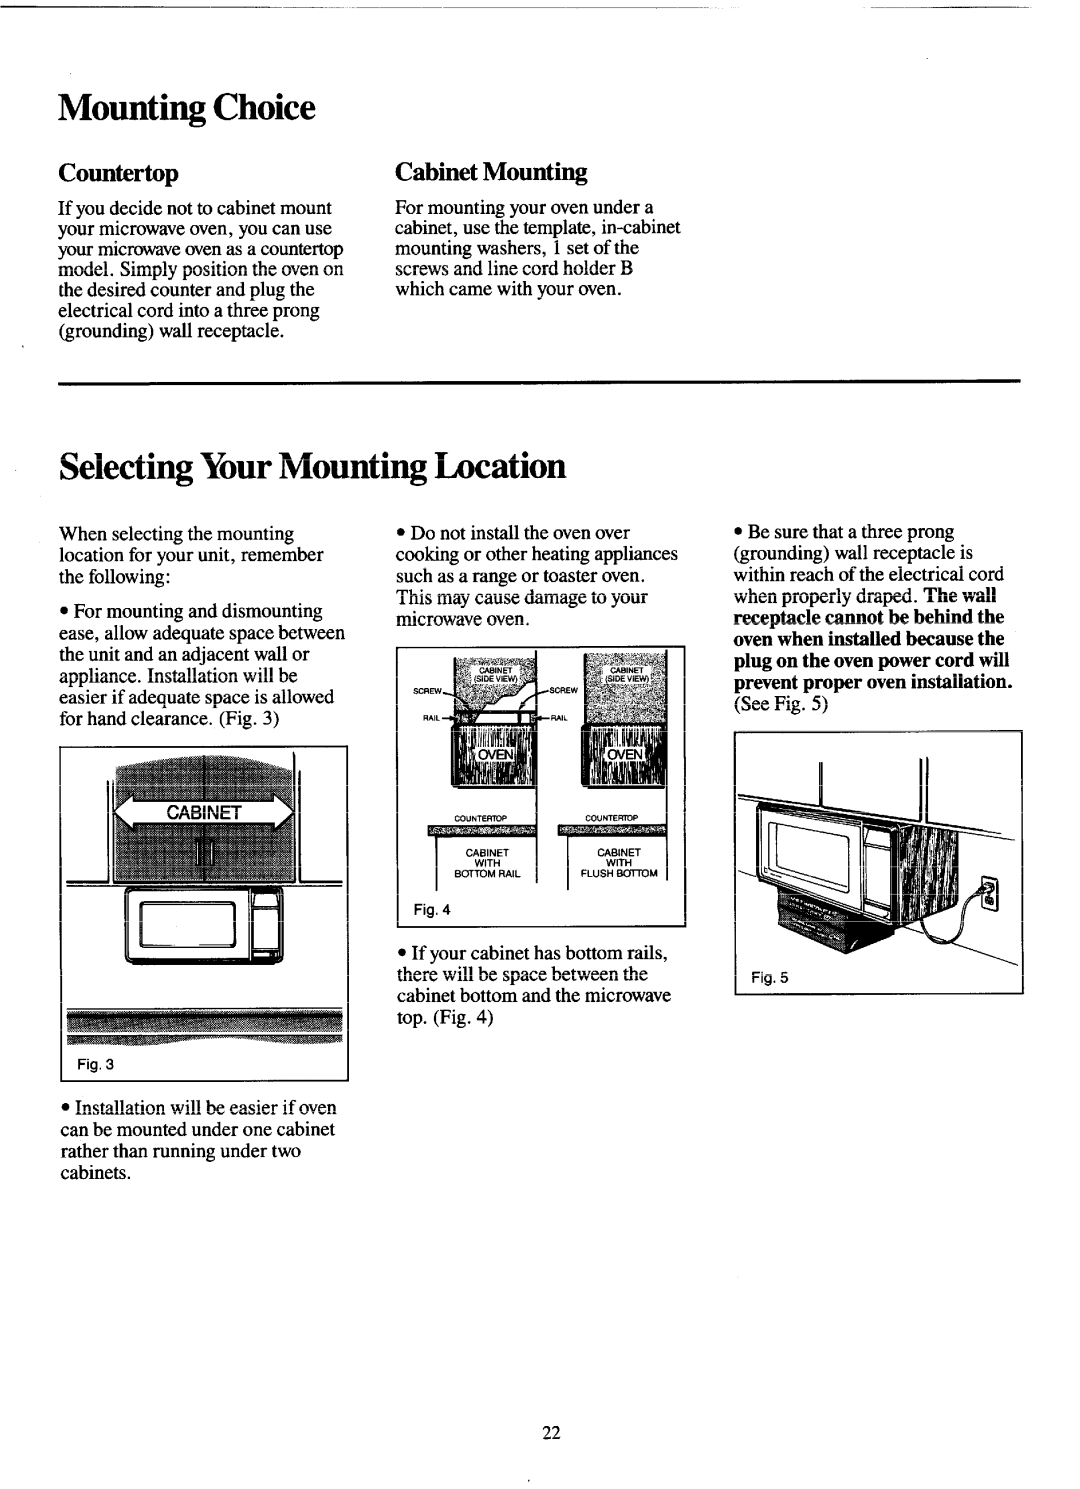 GE JEM31H manual Mounting Choice, Selecting YourMounting Location, Countertop, Cabinet Mounting, TczIIEr Fig 